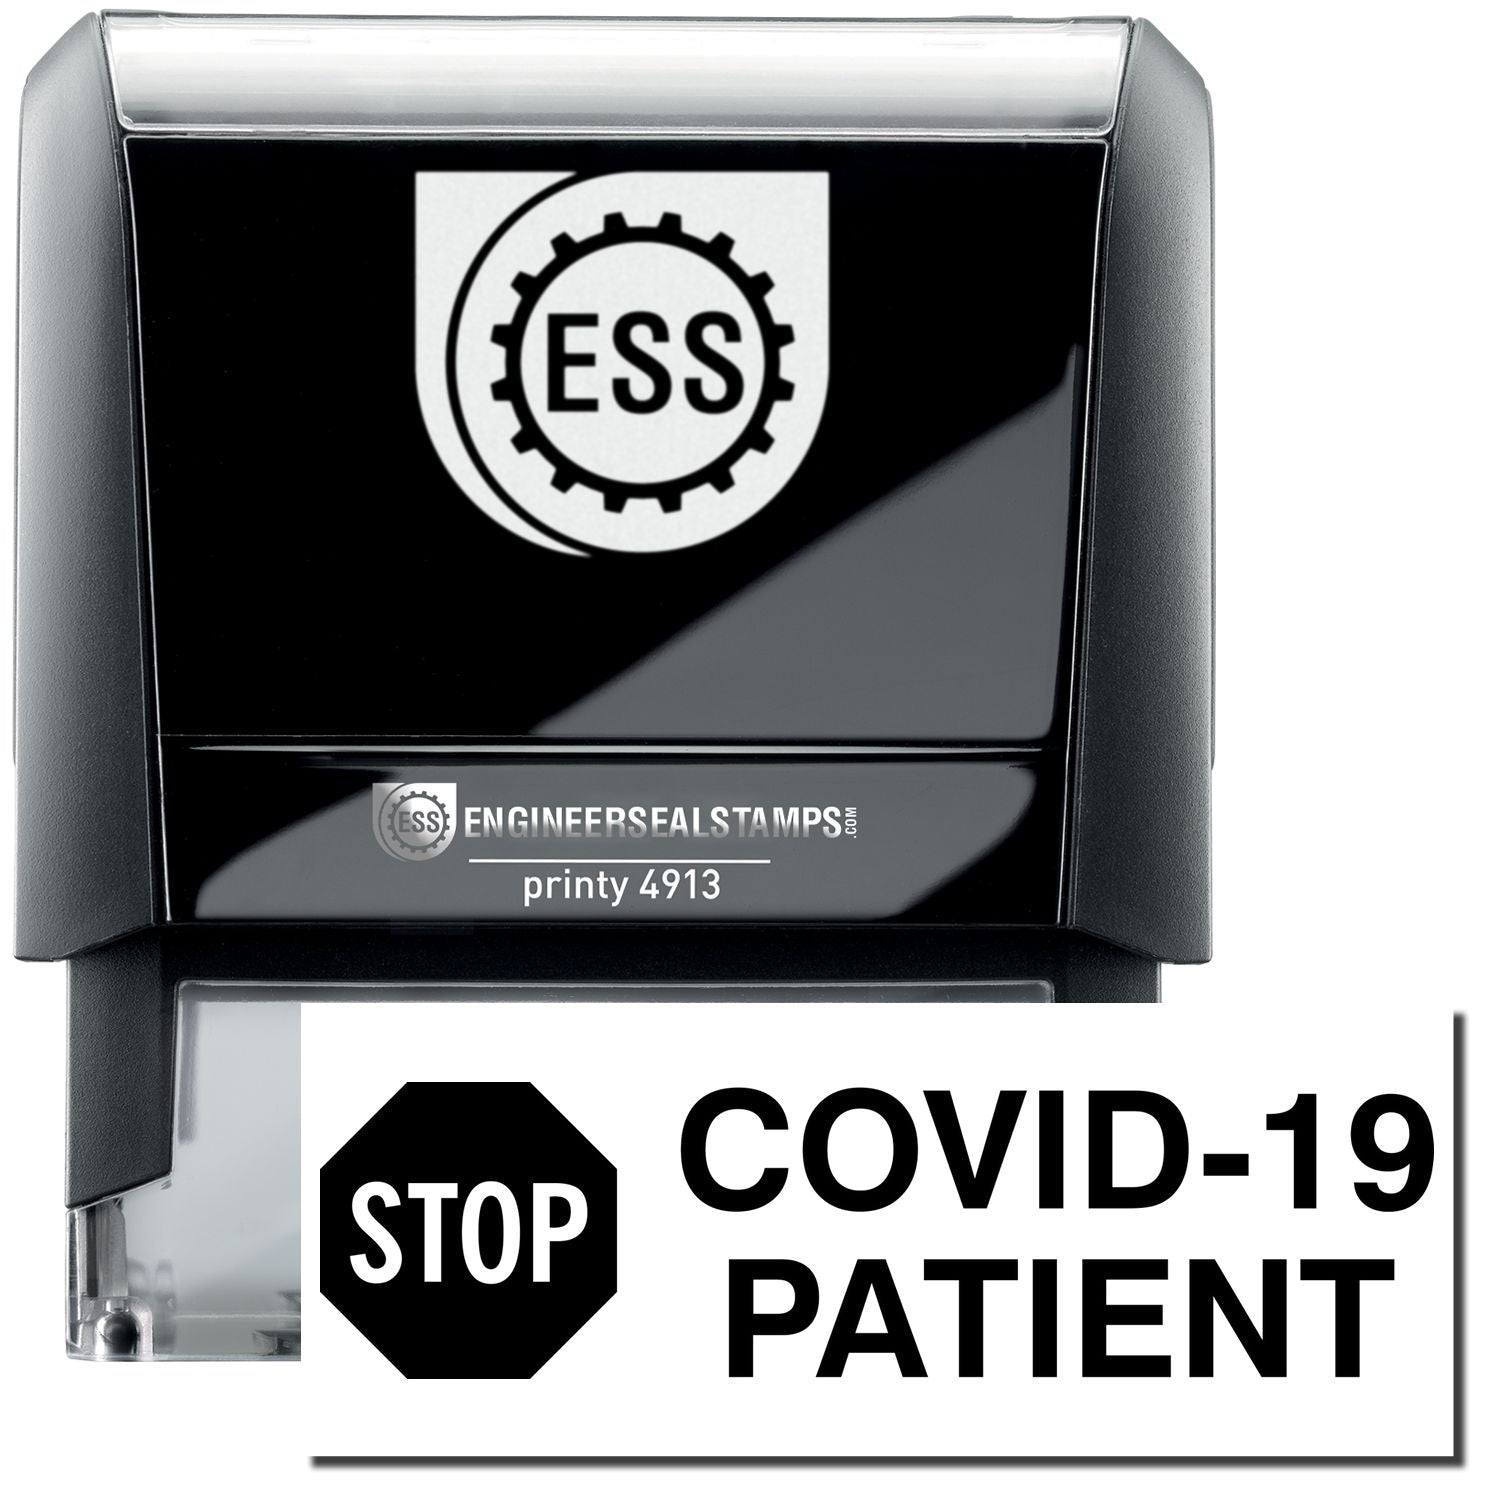 A self-inking stamp with a stamped image showing how the text "STOP COVID-19 PATIENT" in a large font with a stop sign board is displayed by it after stamping.